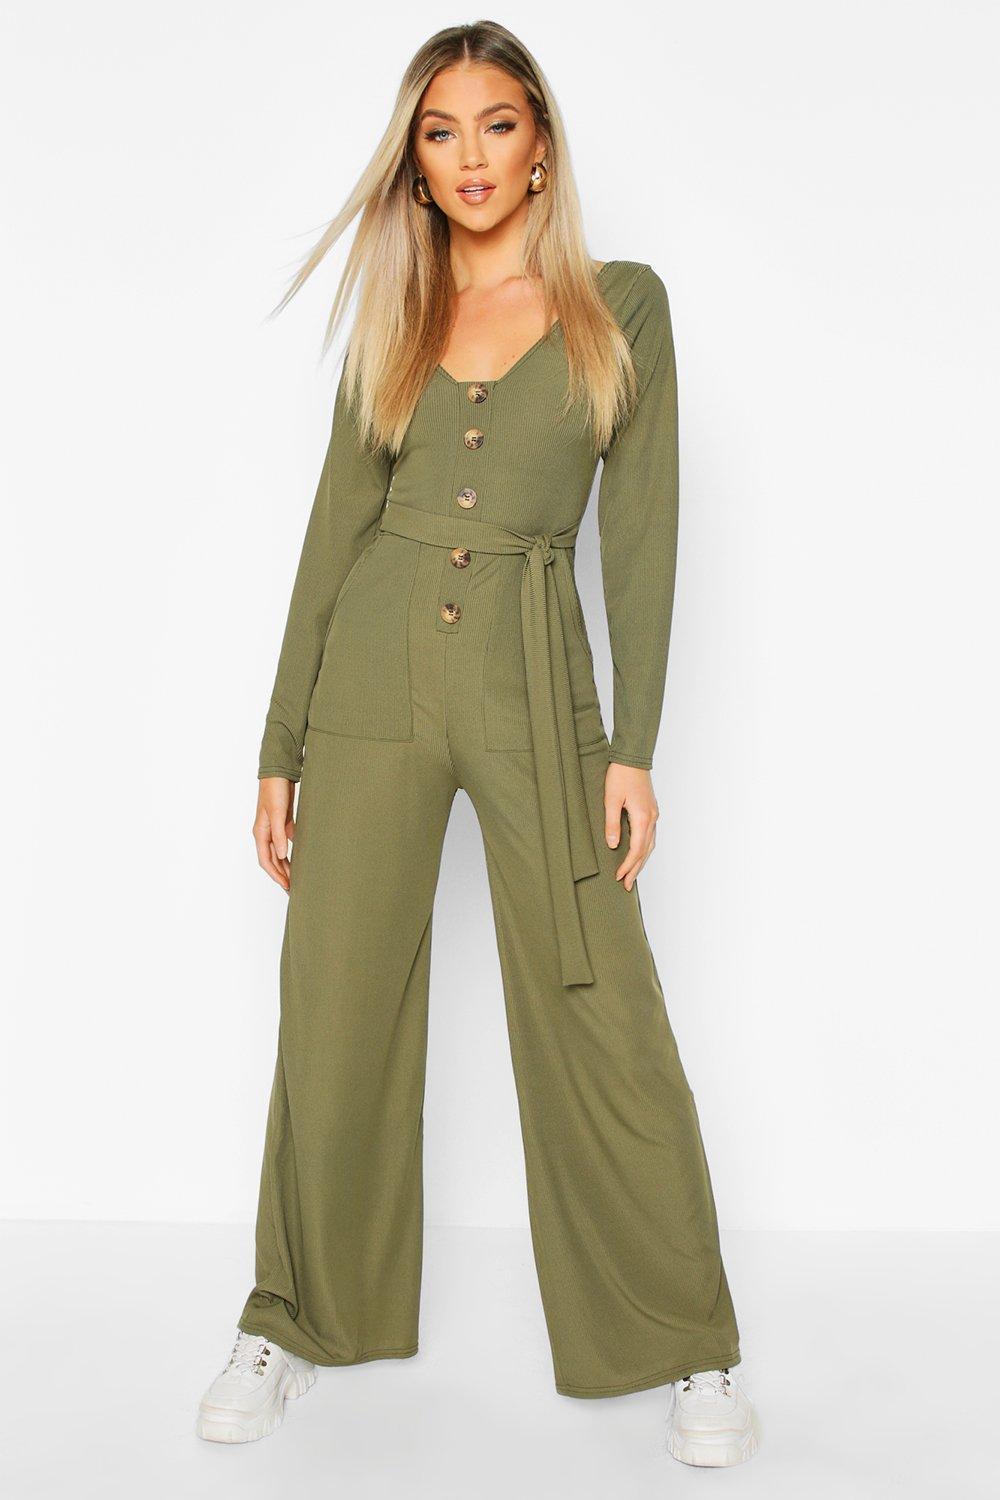 Boohoo Womens Long Sleeve Horn Button Ribbed Tie Jumpsuit in Green - Lyst